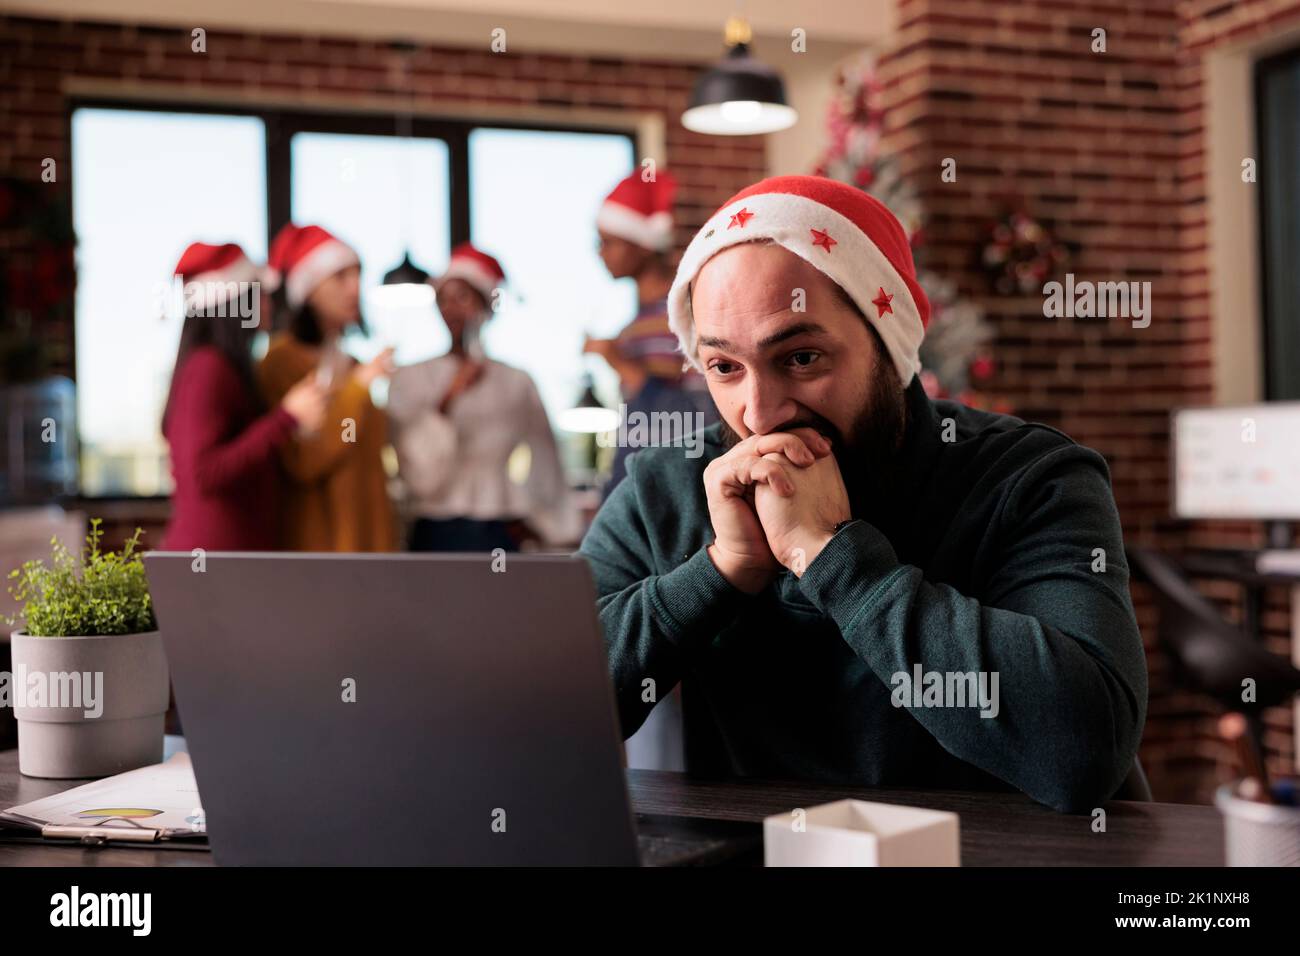 Businessman feeling disturbed at office job because of noisy coworkers celebrating christmas eve. Tired irritated employee being overwhelmed and working during winter holiday season. Stock Photo